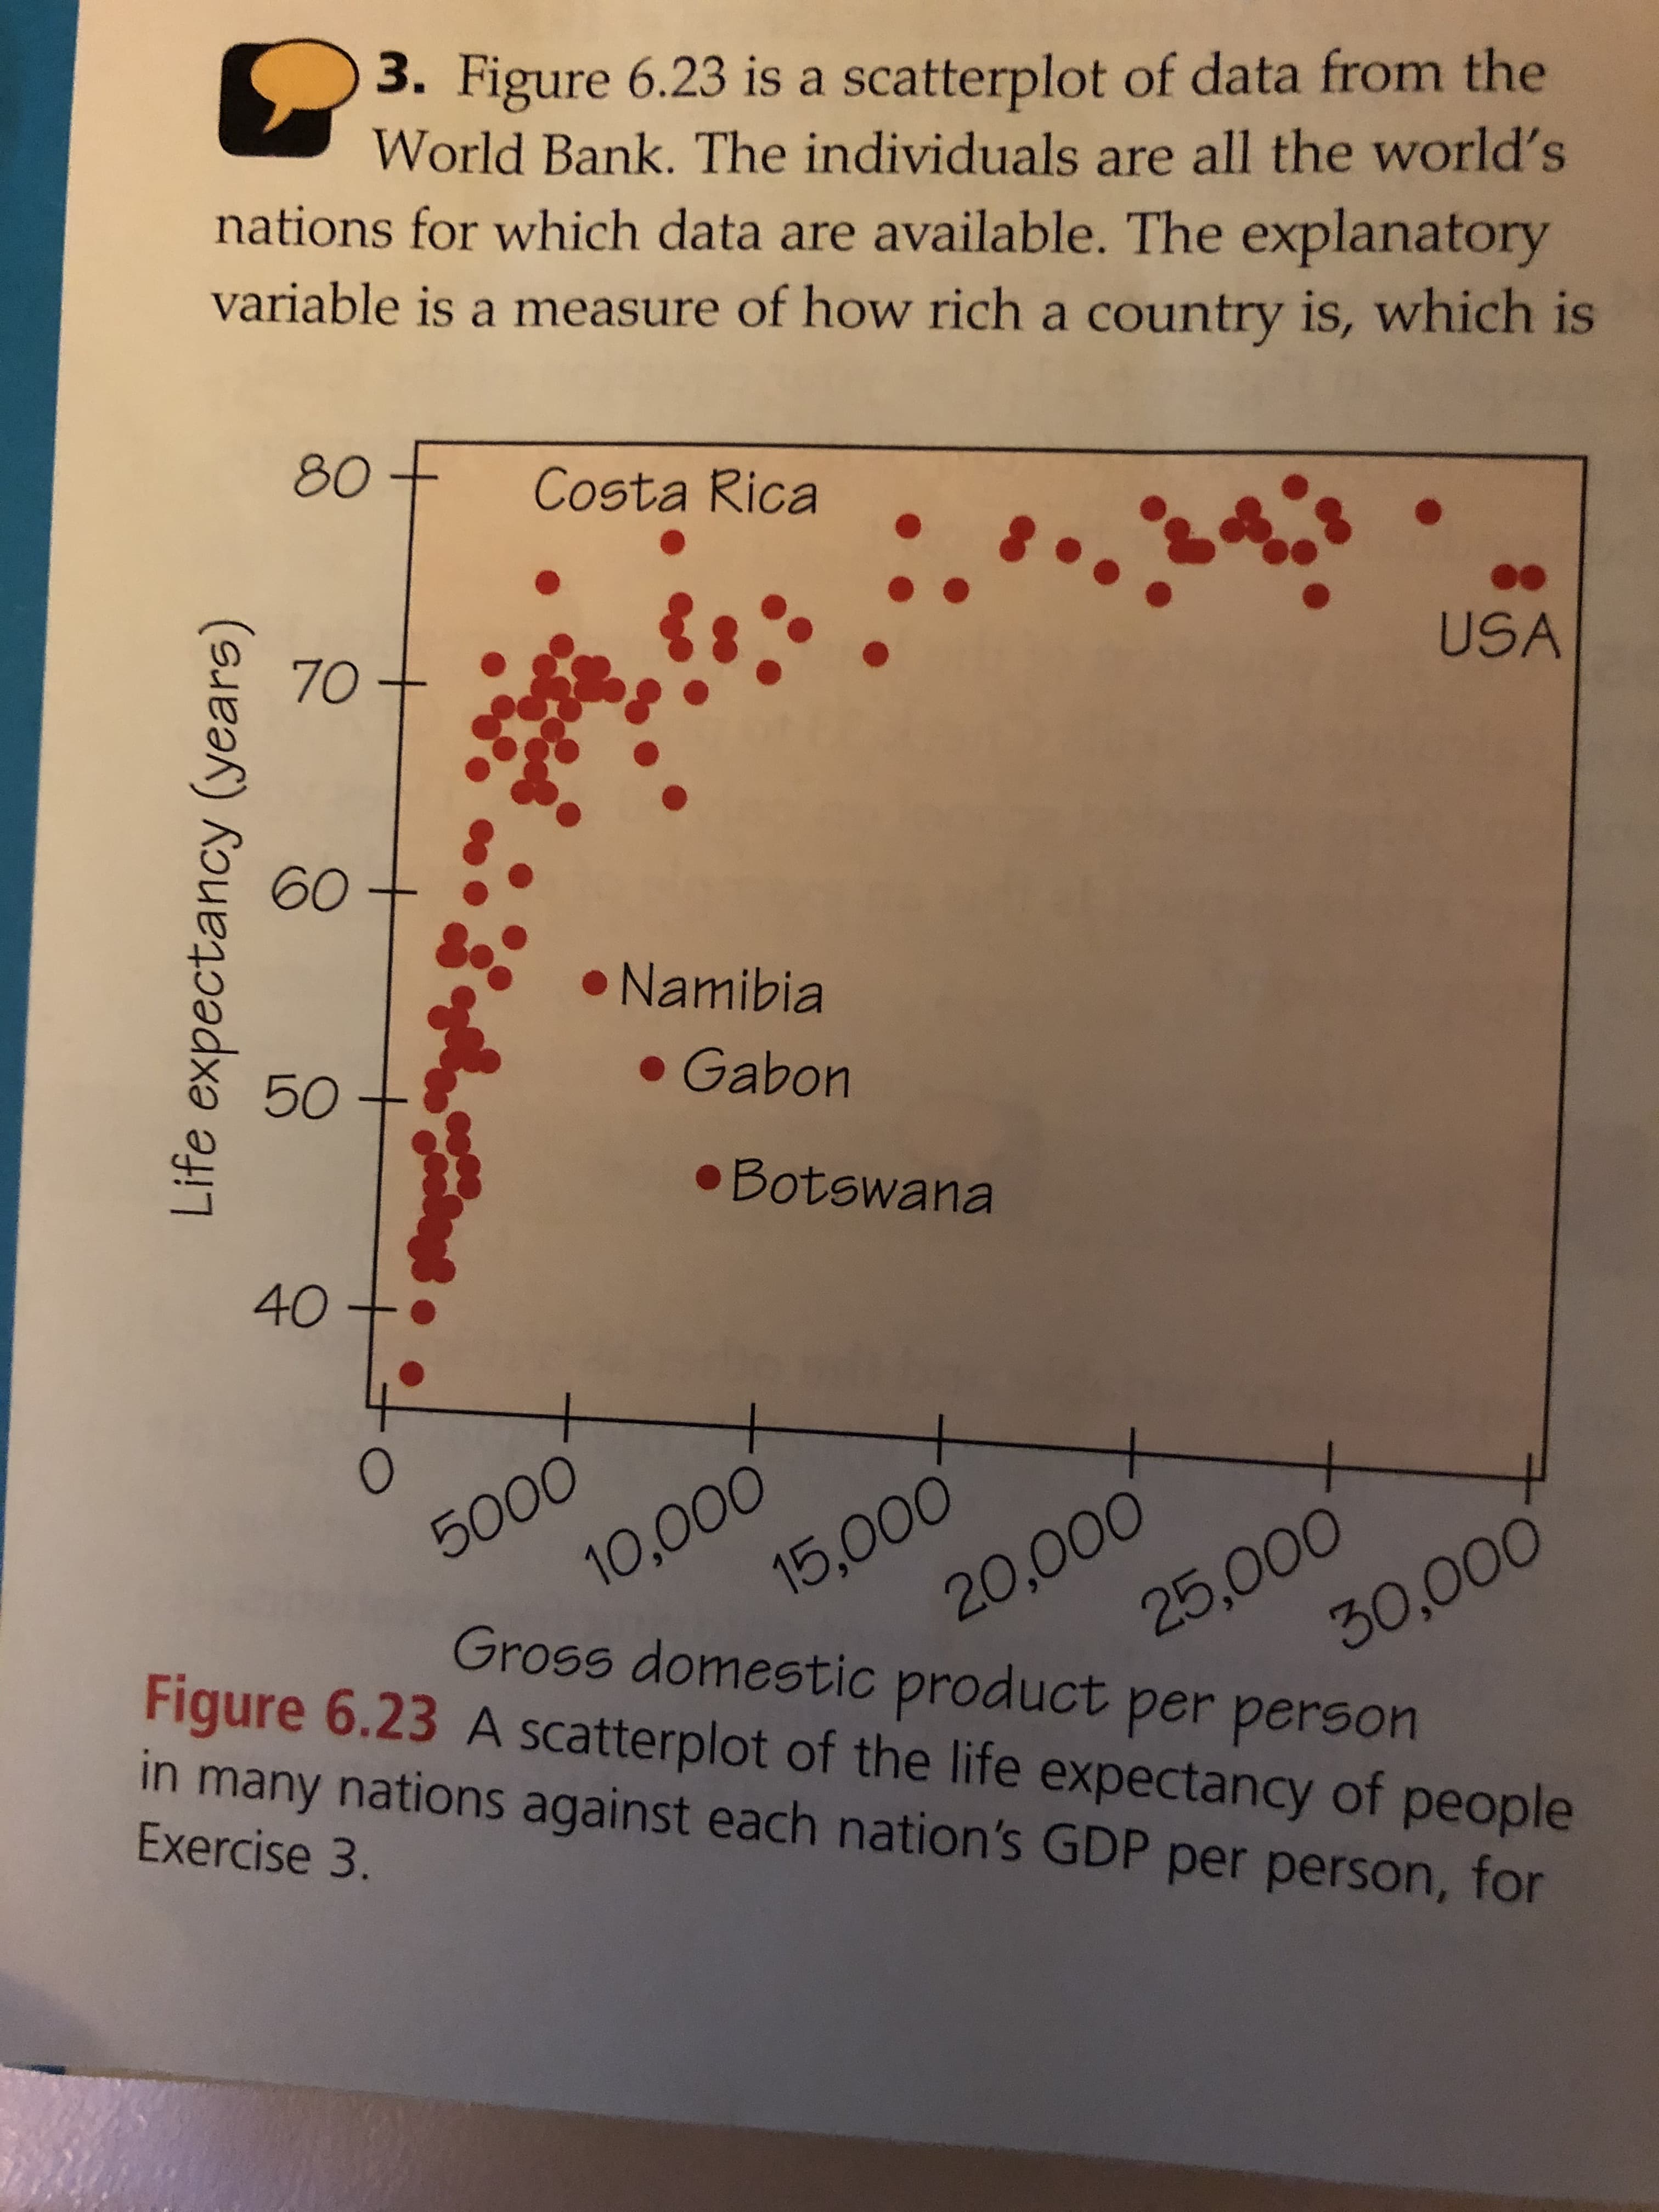 3. Figure 6.23 is a scatterplot of data from the
World Bank. The individuals are all the world's
nations for which data are available. The explanatory
variable is a measure of how rich a country is, which is
80
Costa Rica
70
USA
60
Namibia
50
Gabon
Botswana
40
5000
10,000
20,000
Gross domestic product per person
Figure 6.23 A scatterplot of the life expectancy of people
25,000
30,000
15,000
in many nations against each nation's GDP per person, for
Exercise 3.
Life expectancy (years)
